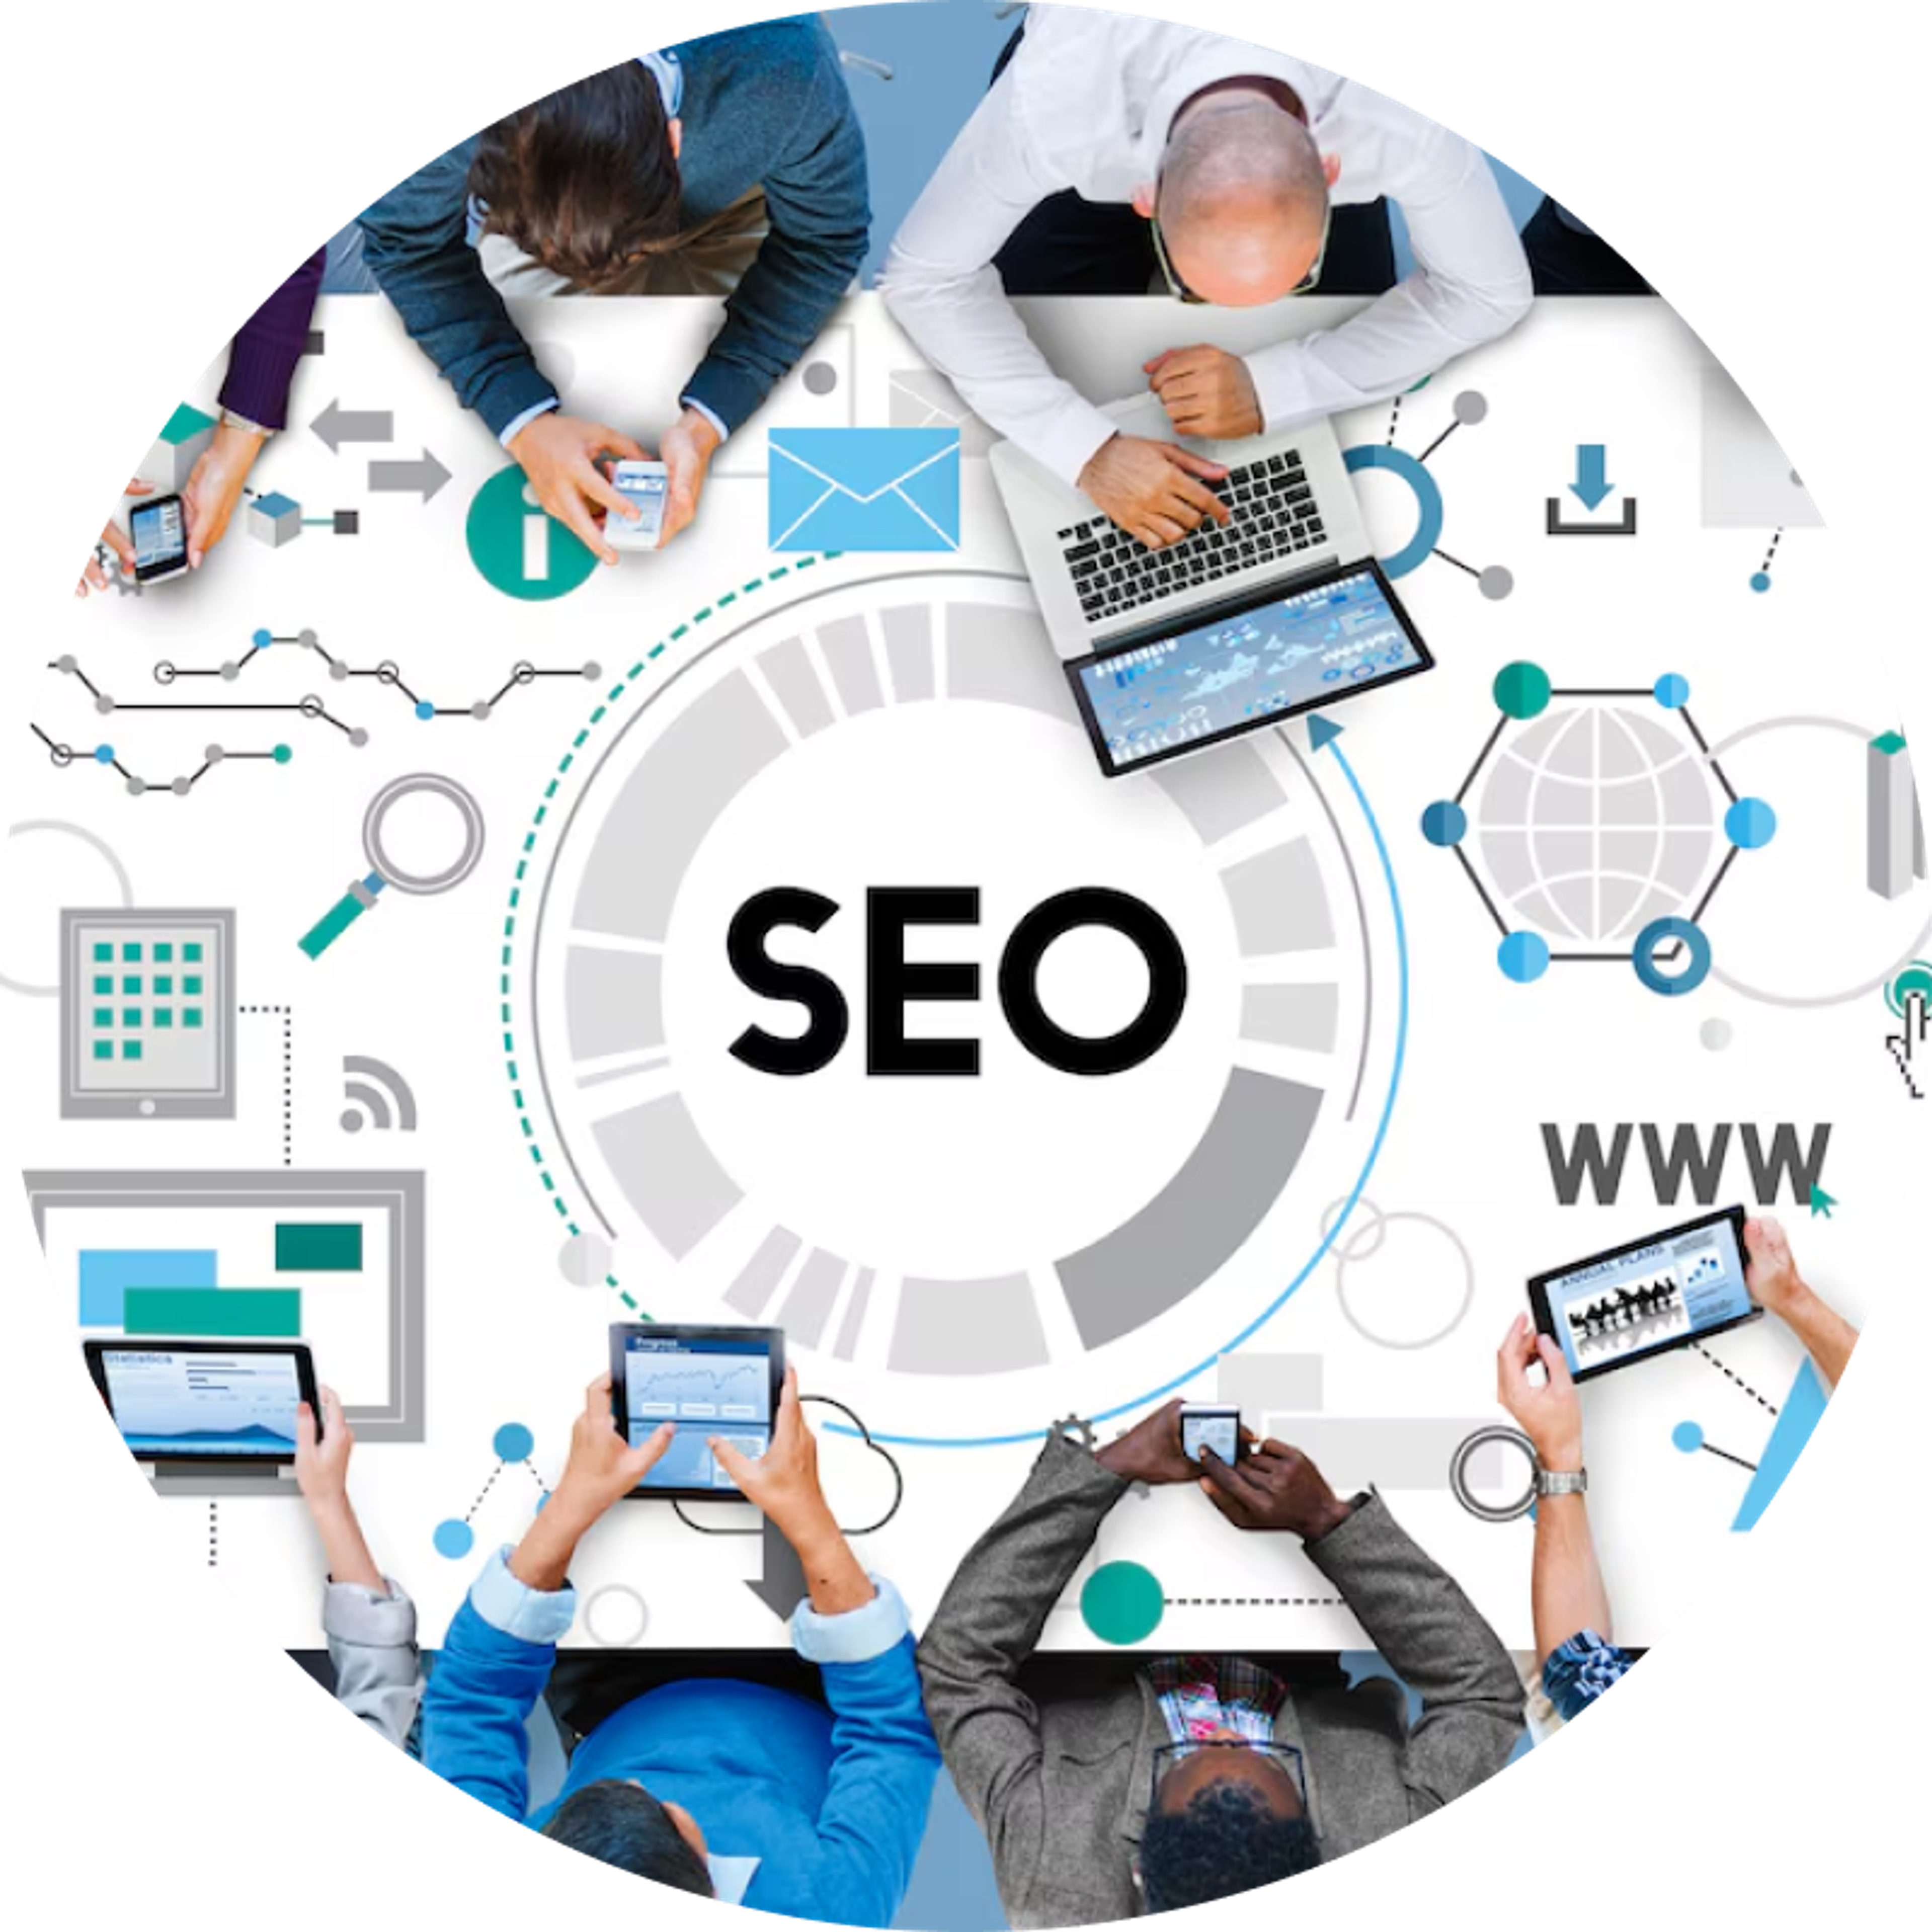 Driving Business With Dallas Fort Worth SEO Services